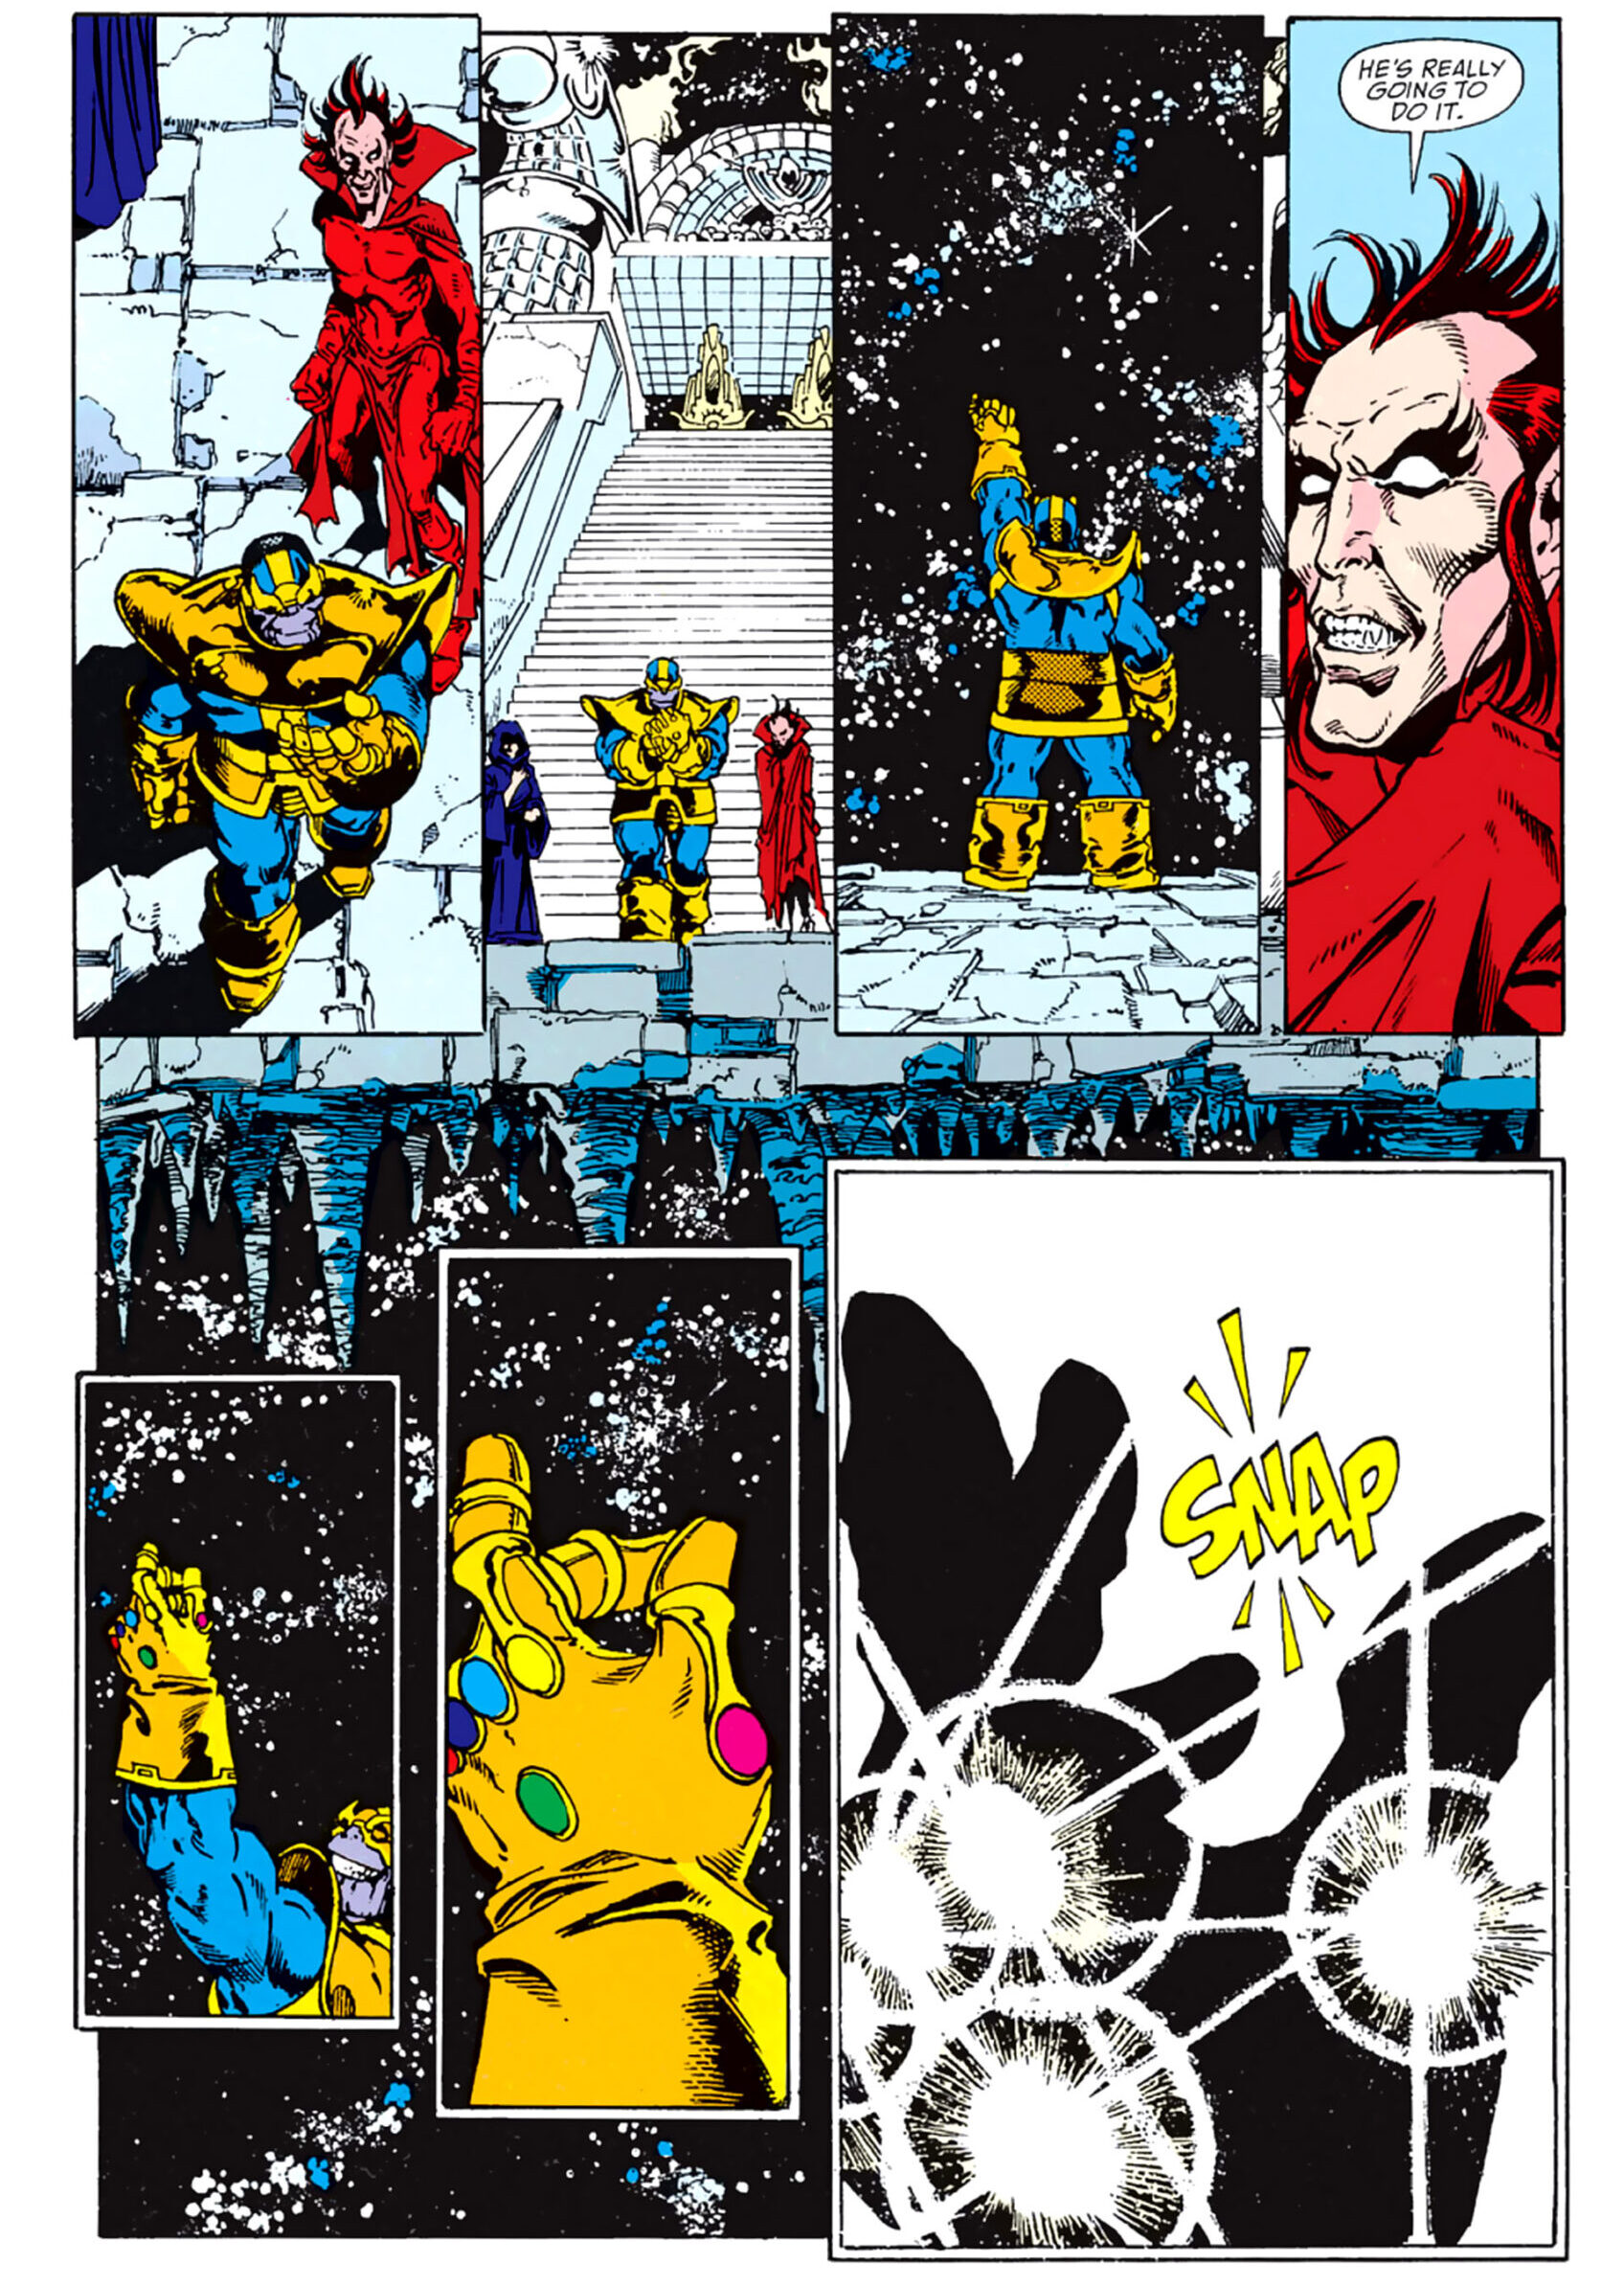 Thanos wipes out half of all life in Infinity Gauntlet Vol. 1 #1 (1991), Marvel Comics. Words by Jim Starlin, art by George Pérez, Josef Rubenstein, Tom Christopher, Max Steele, Ian Laughlin,and Jack Morelli.